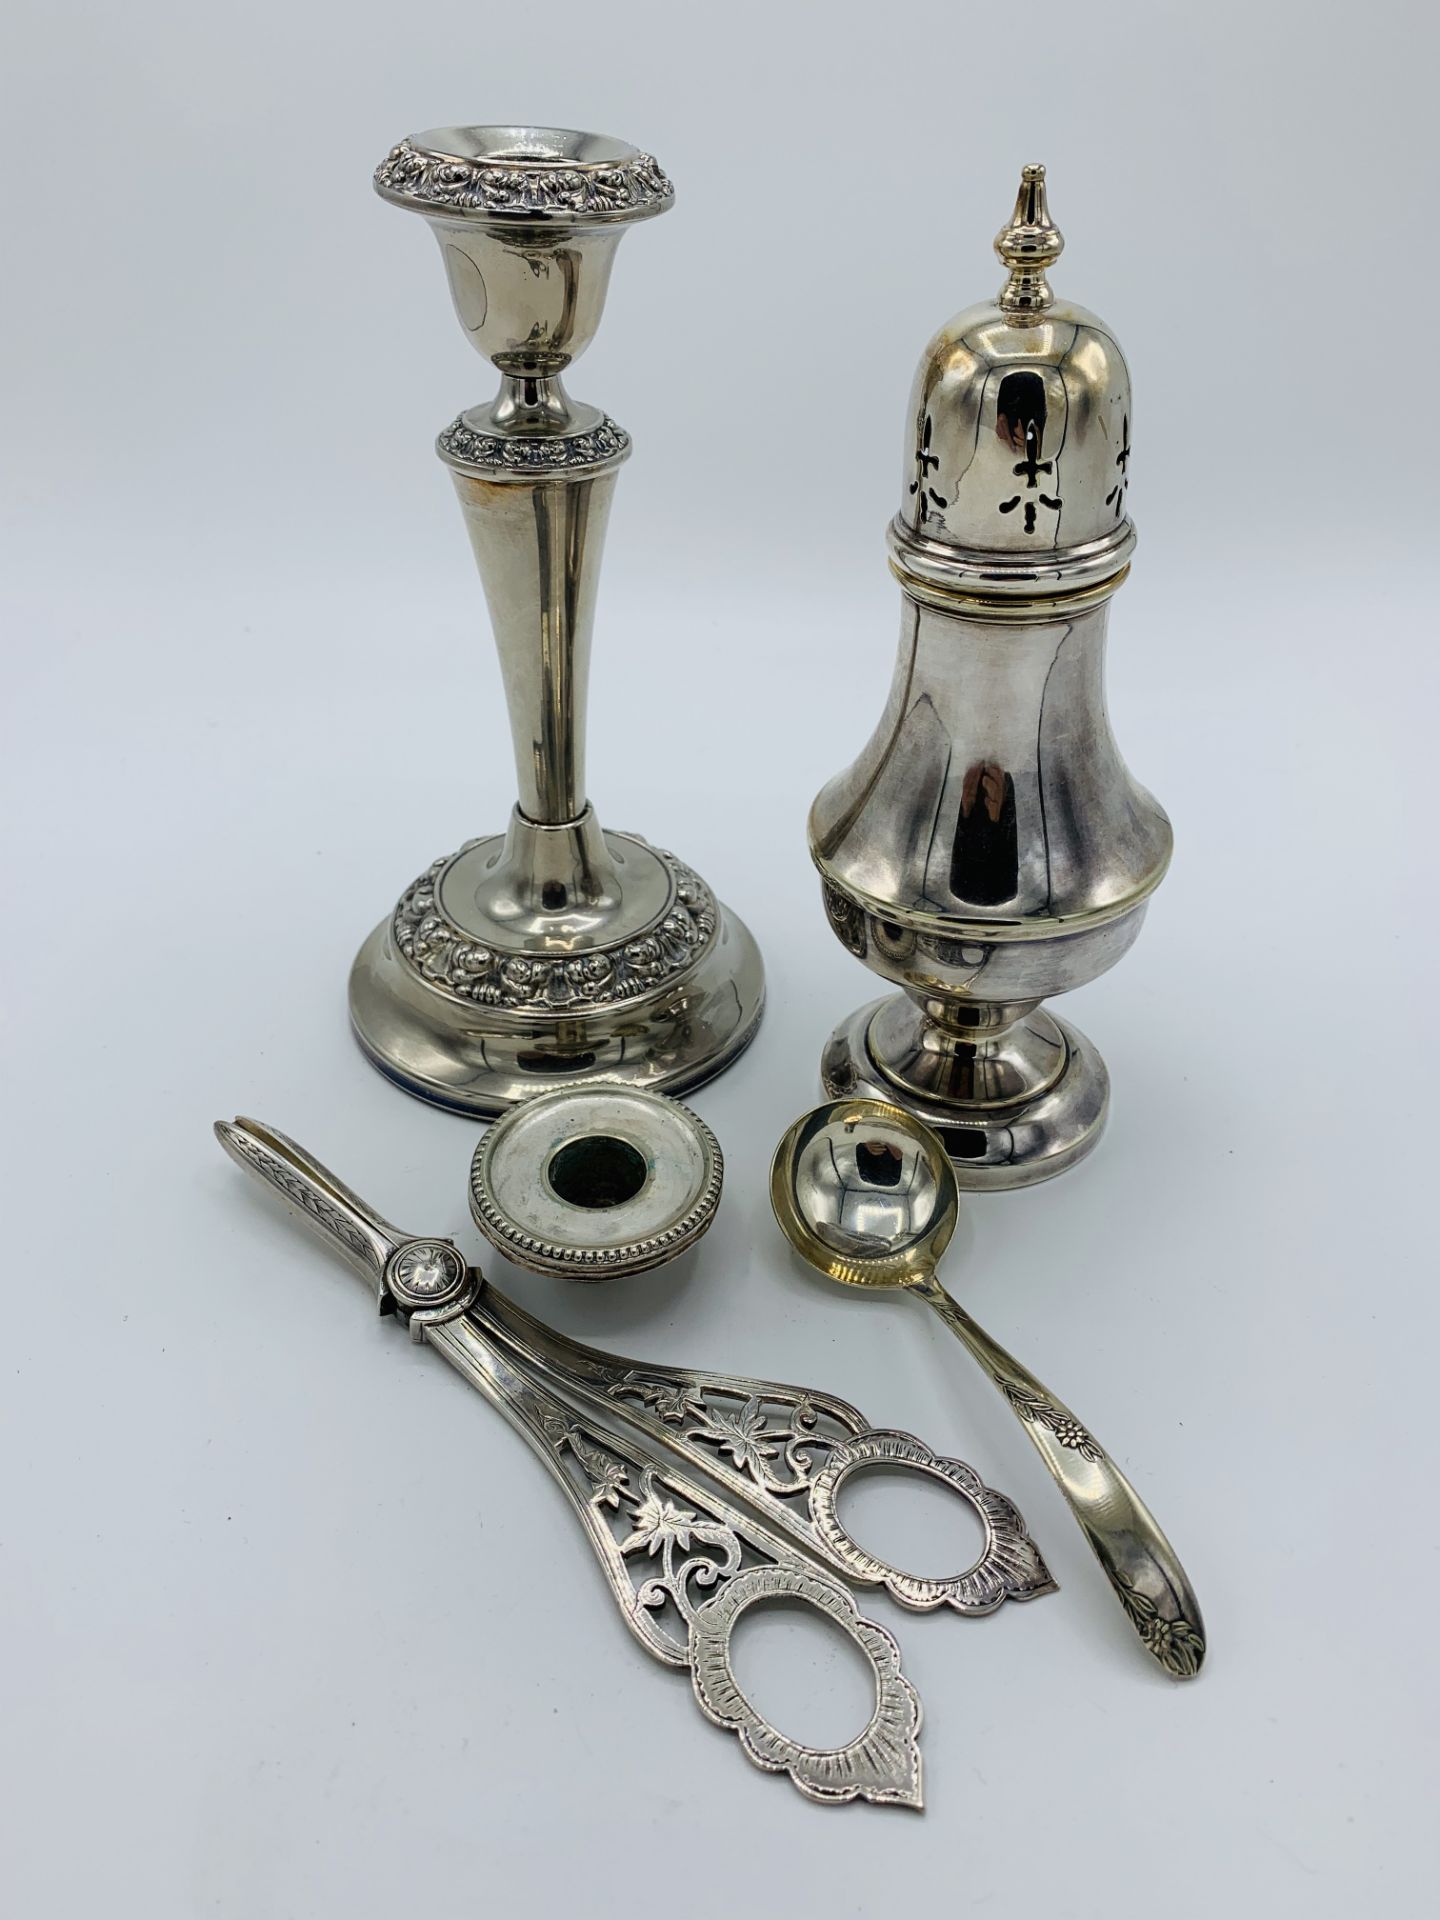 Silver plated sugar caster; candle stick; snuffer and ladle